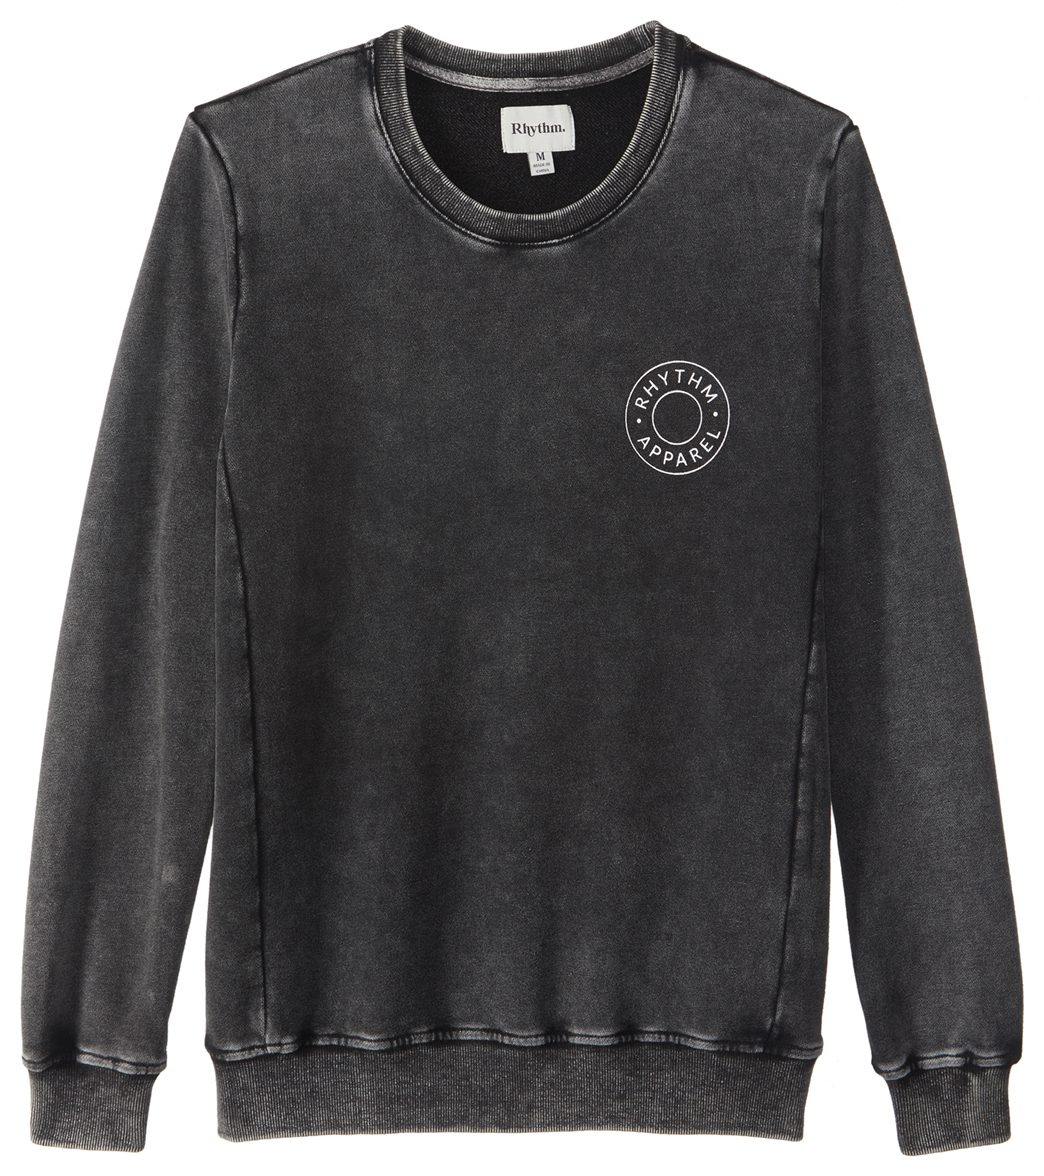 Rhythm Men's Washed Out Crew Neck Sweater at SwimOutlet.com